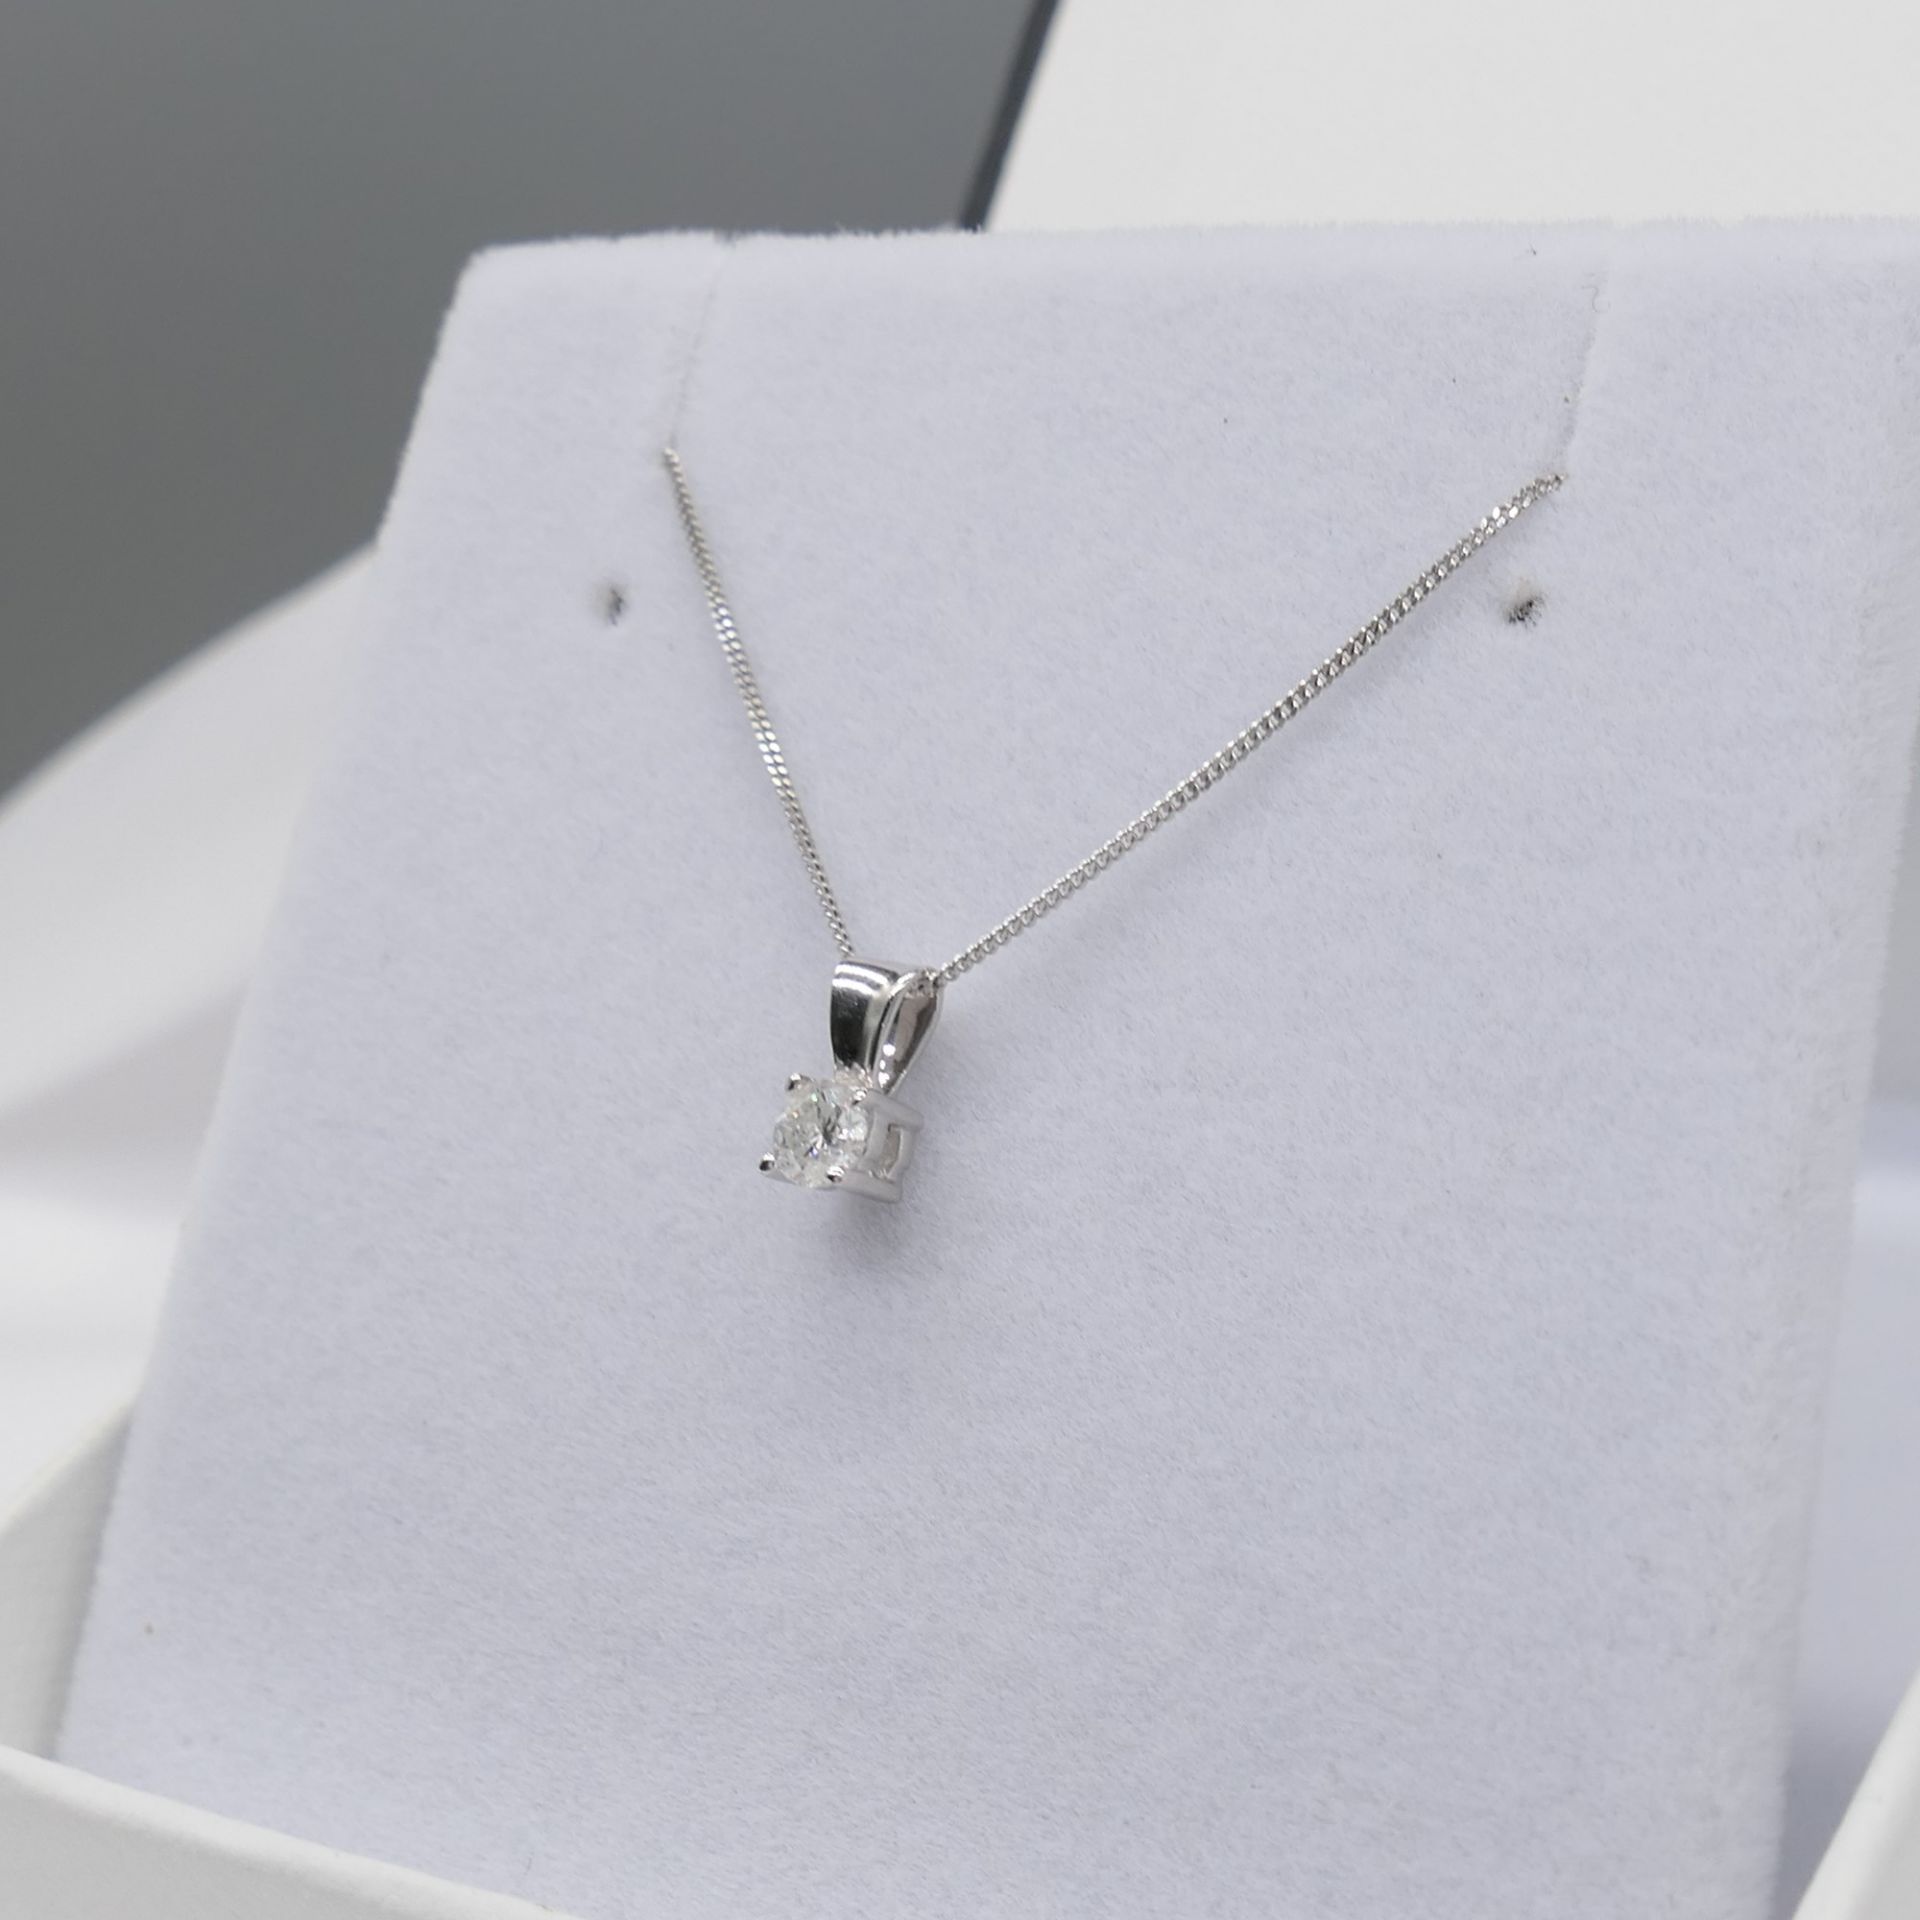 0.15 carat diamond solitaire necklace in white gol - Image 3 of 8